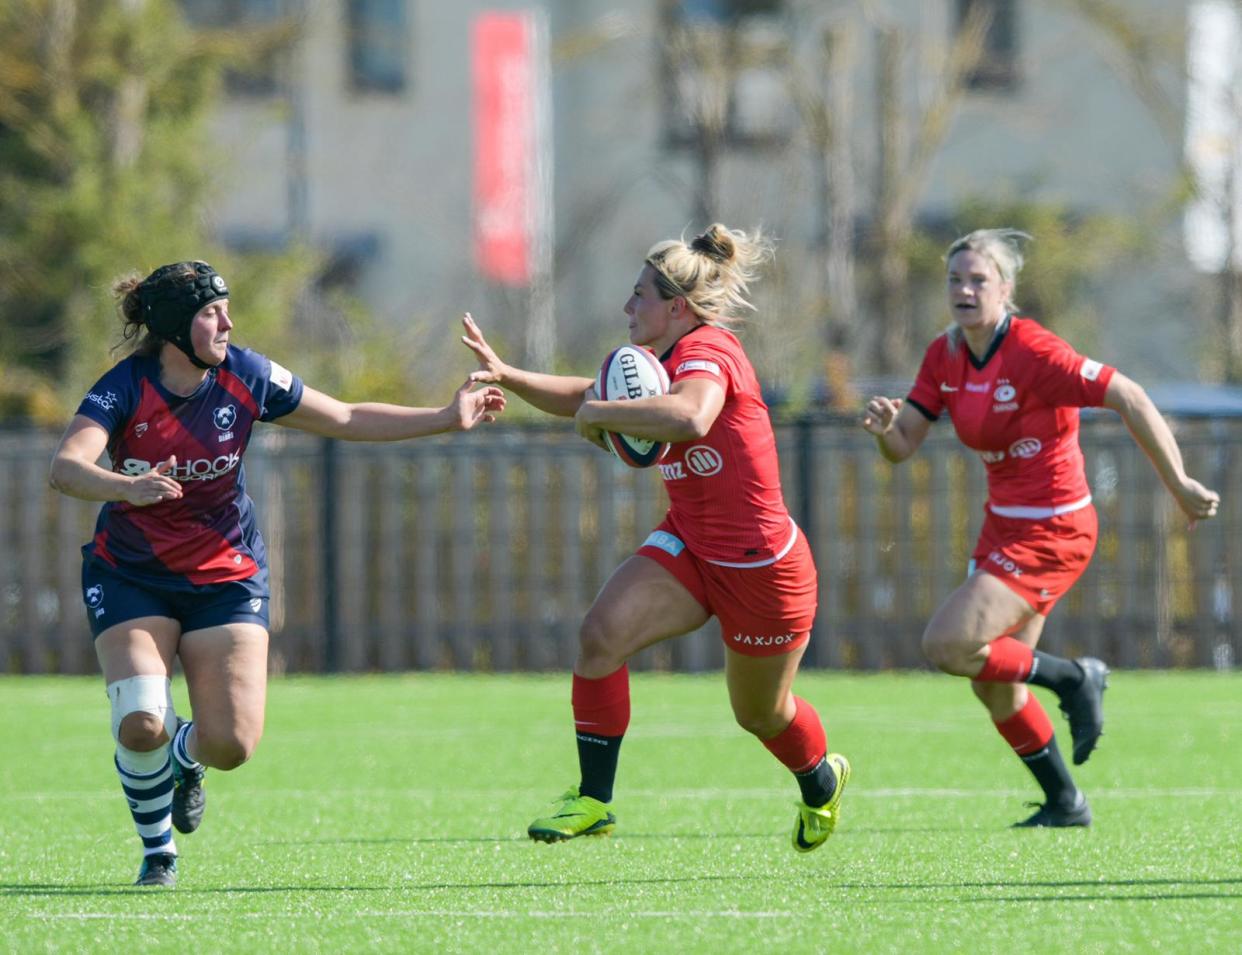 Vicky Fleetwood in action for reigning champions Saracens